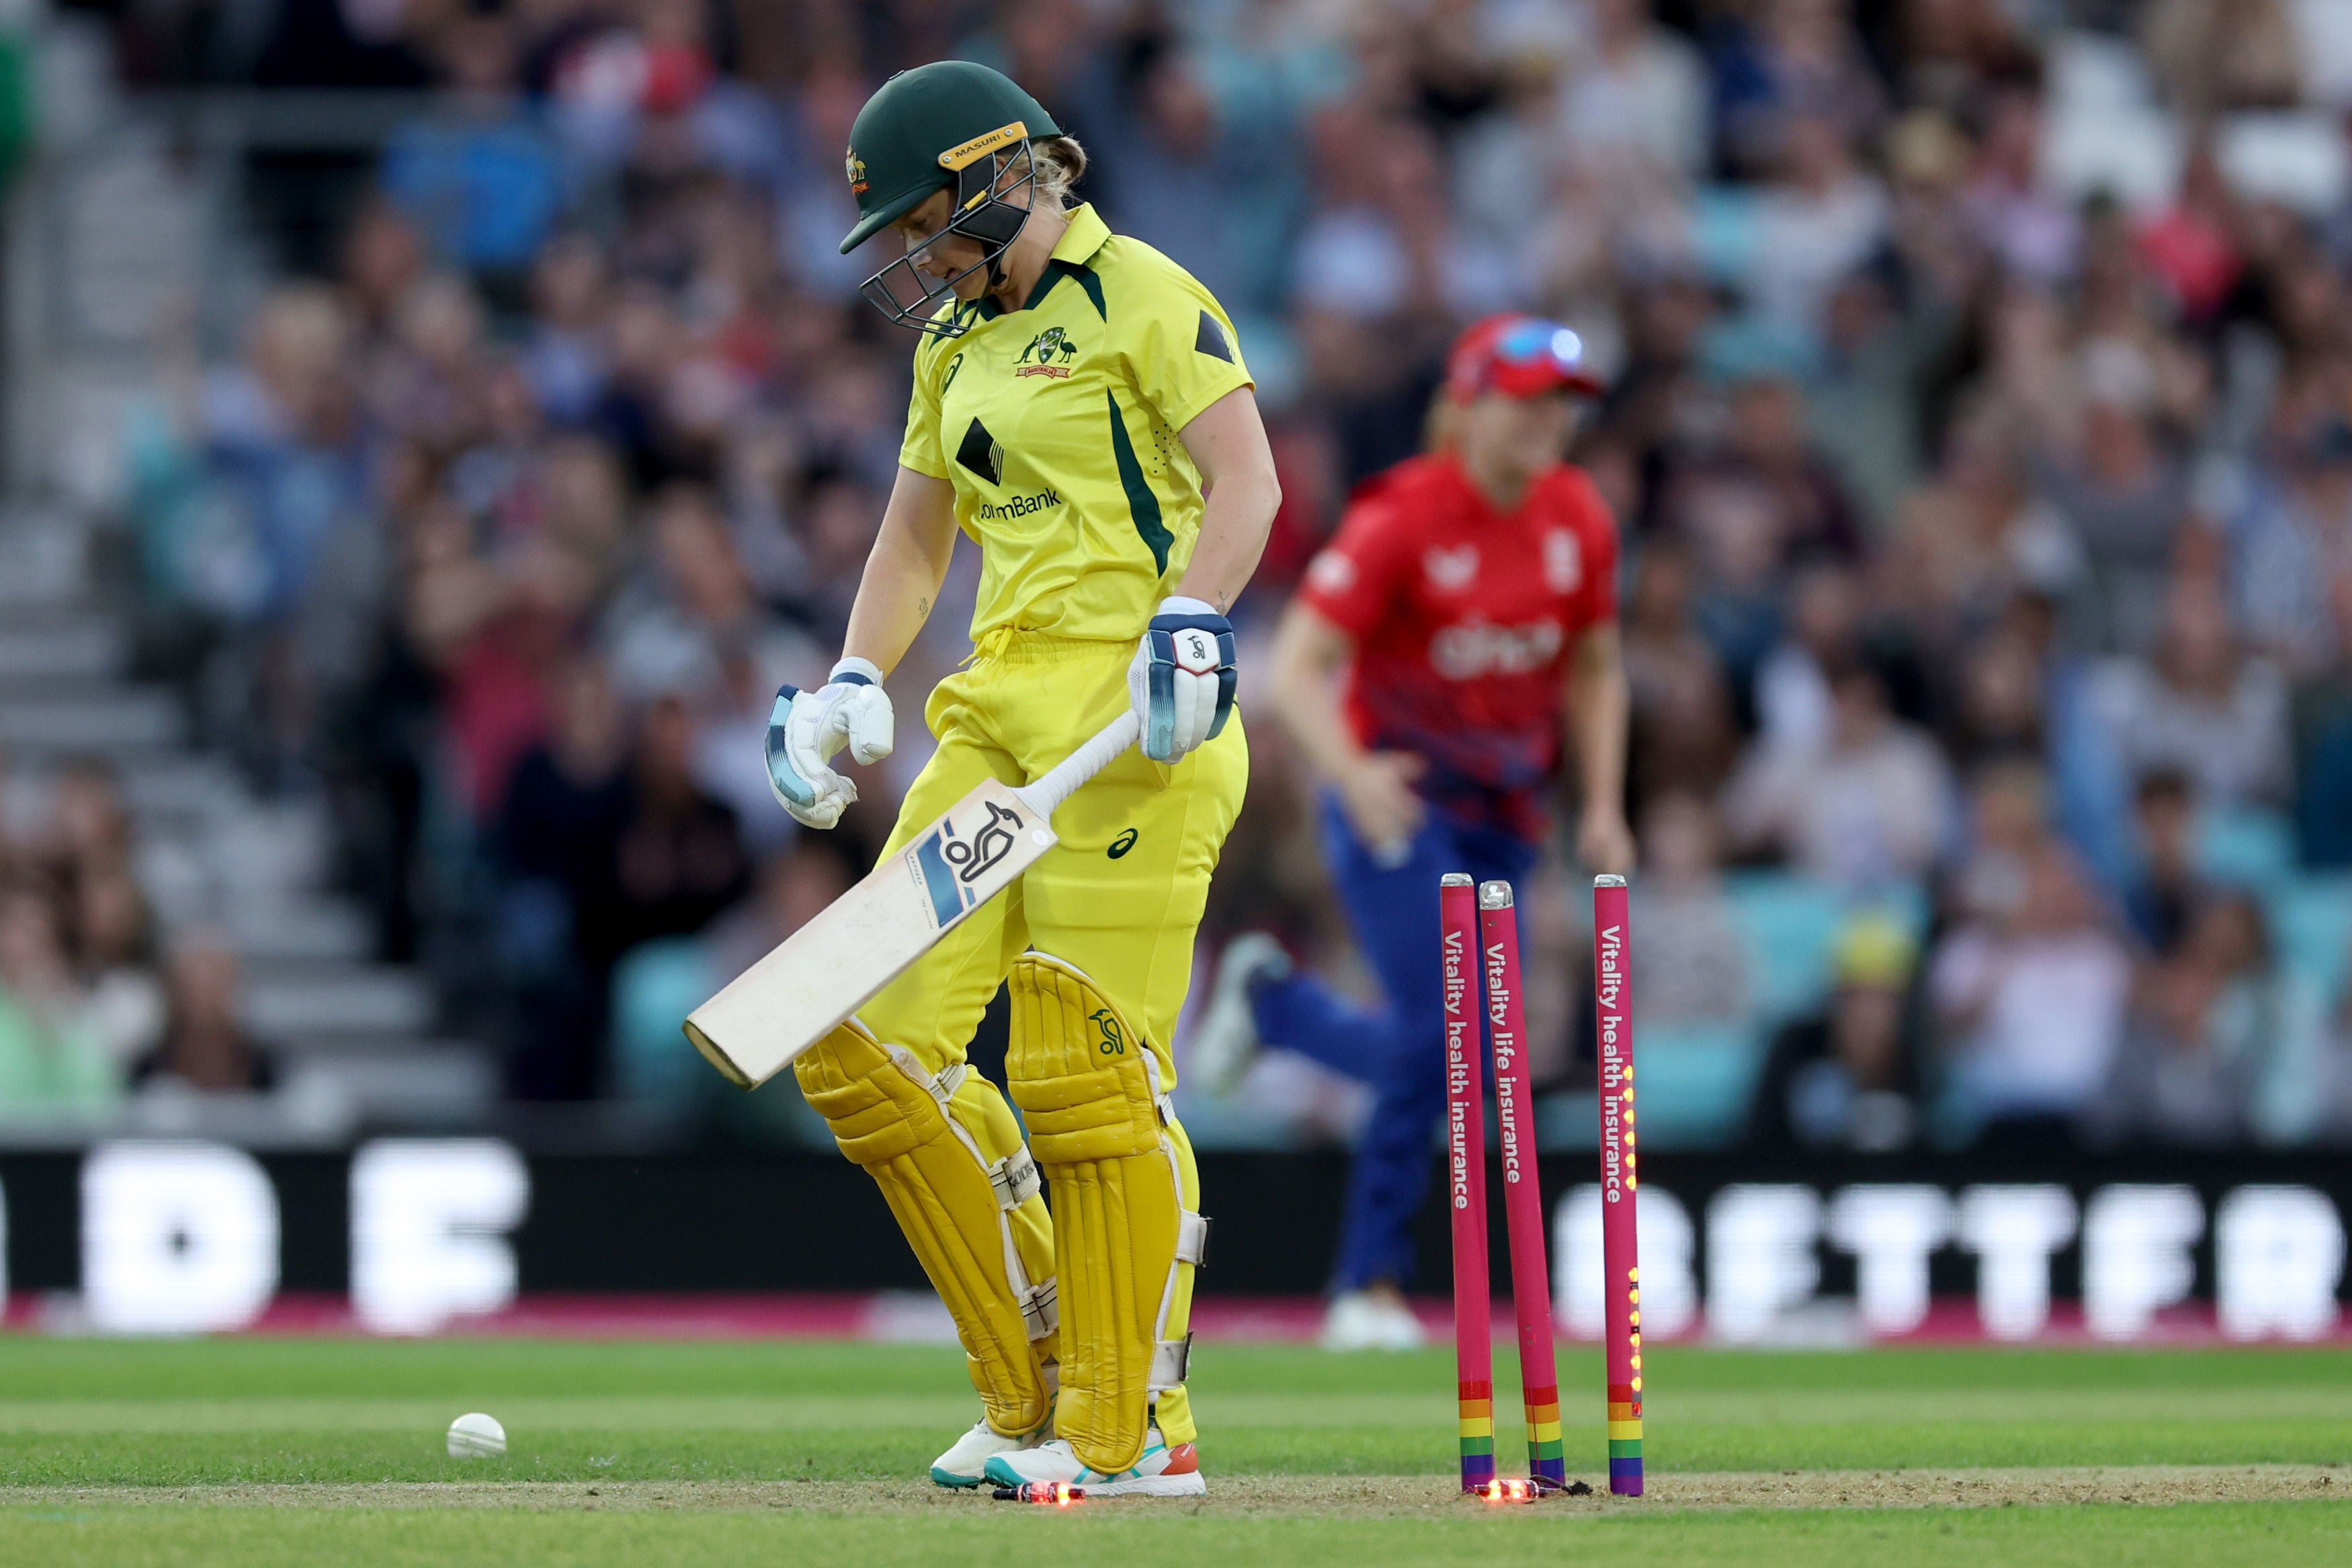 Alyssa Healy’s dismissal sparked a batting collapse for Australia